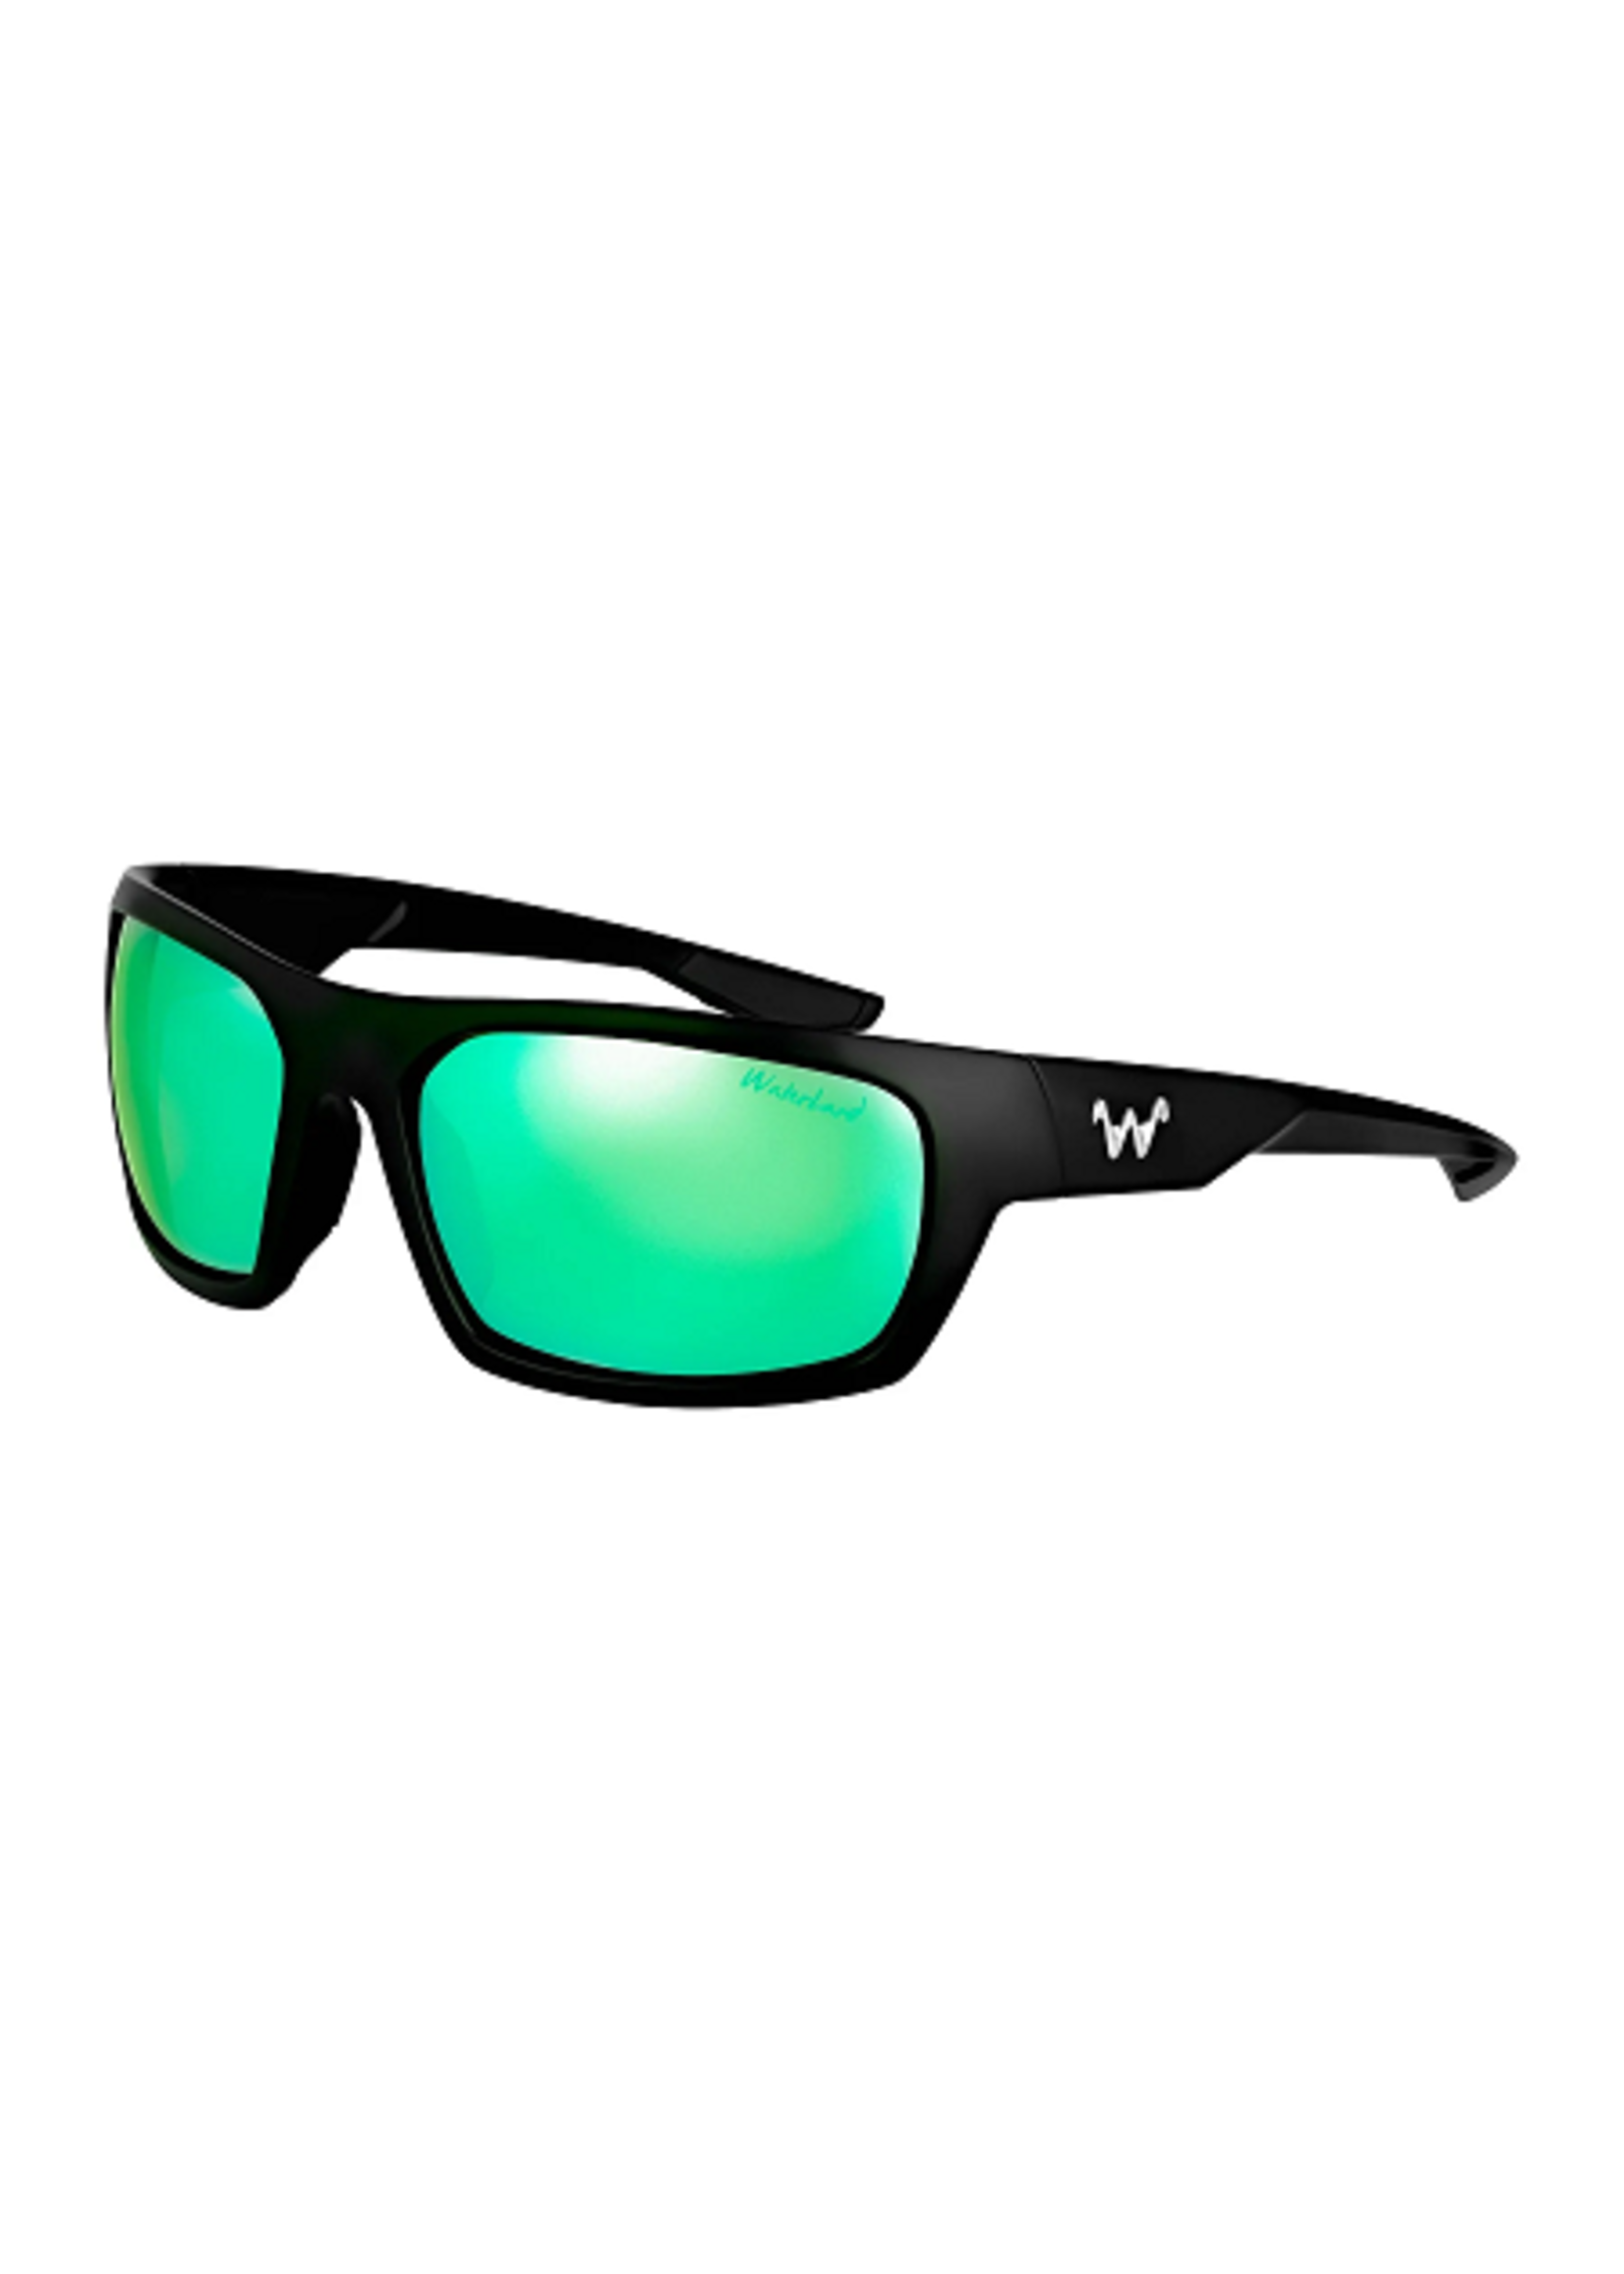 Tell me you love WaterLand sunglasses without telling me you love